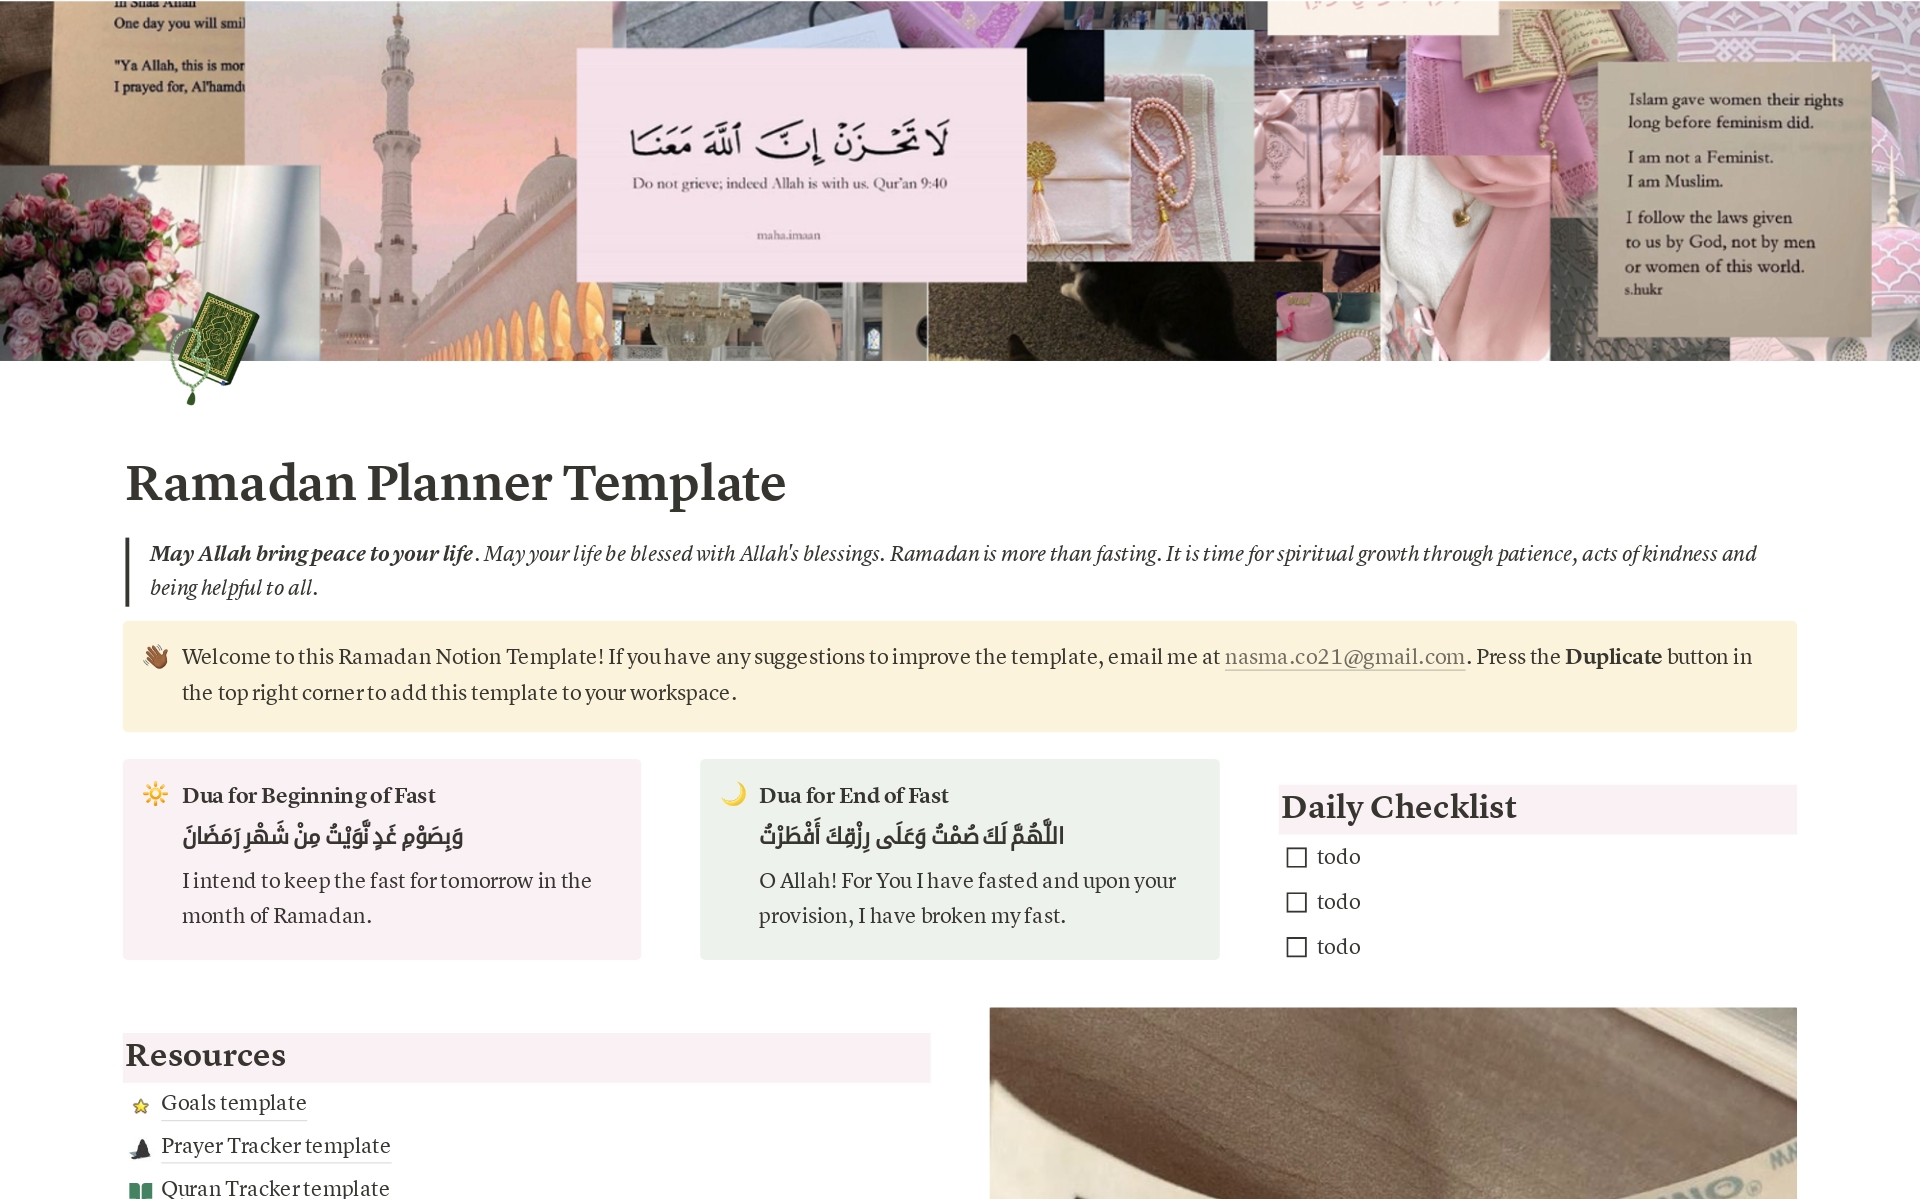 A simple, effective planner to keep Muslim's on track this Ramadan. Using this planner, Muslim's can track daily habits to maximize their Ramadan. Ramadan Mubarak!